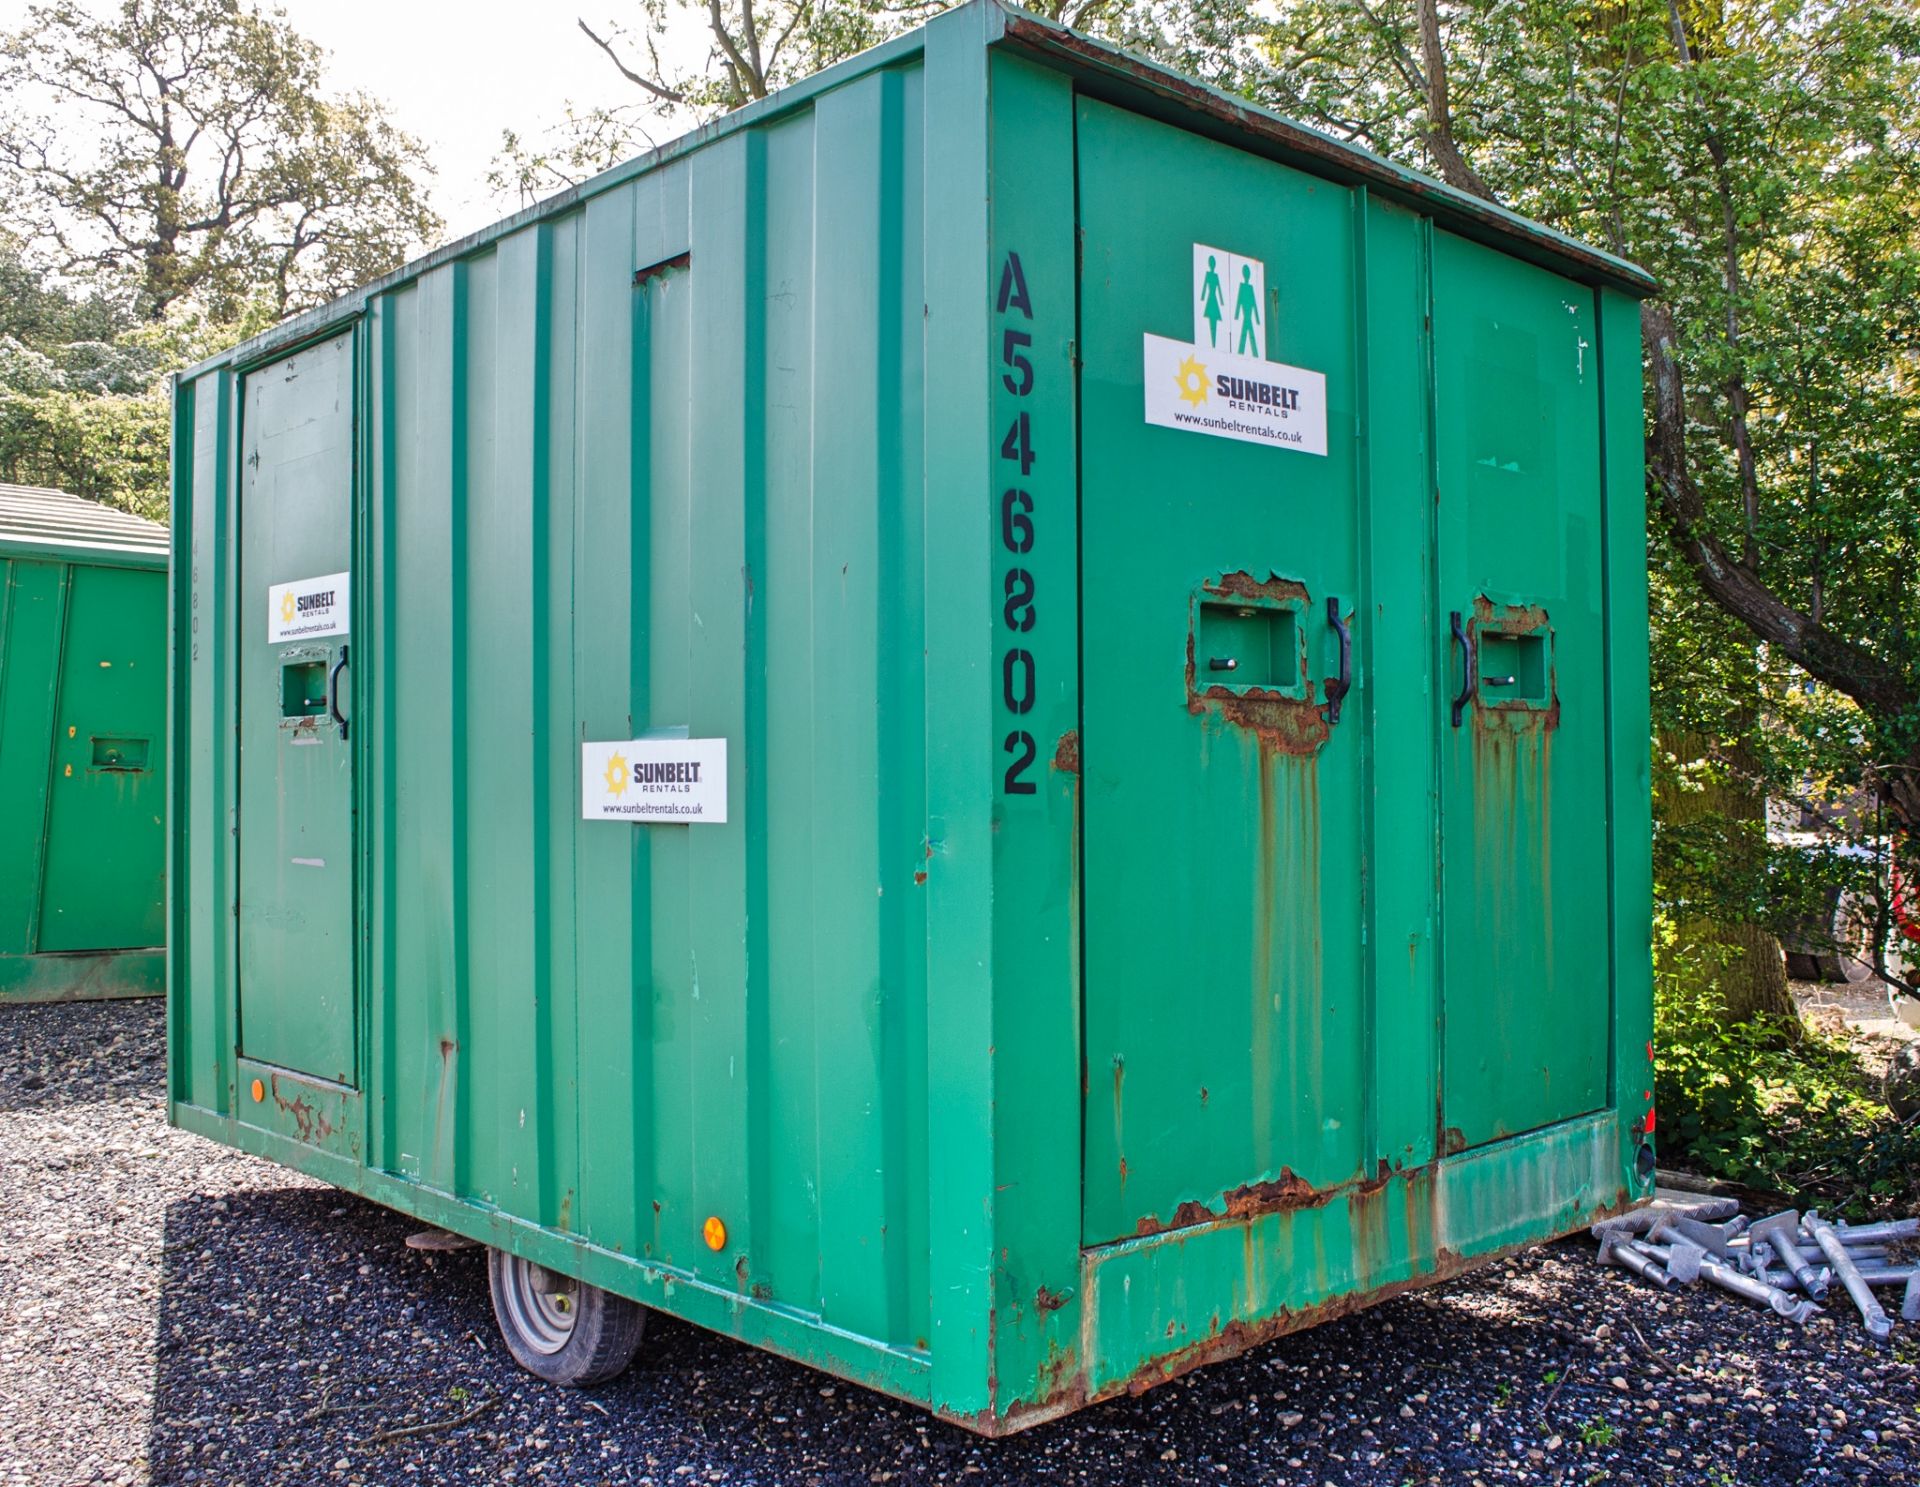 Groundhog 12 ft x 8 ft mobile welfare unit Comprising of: canteen area, toilet & generator room - Image 6 of 11